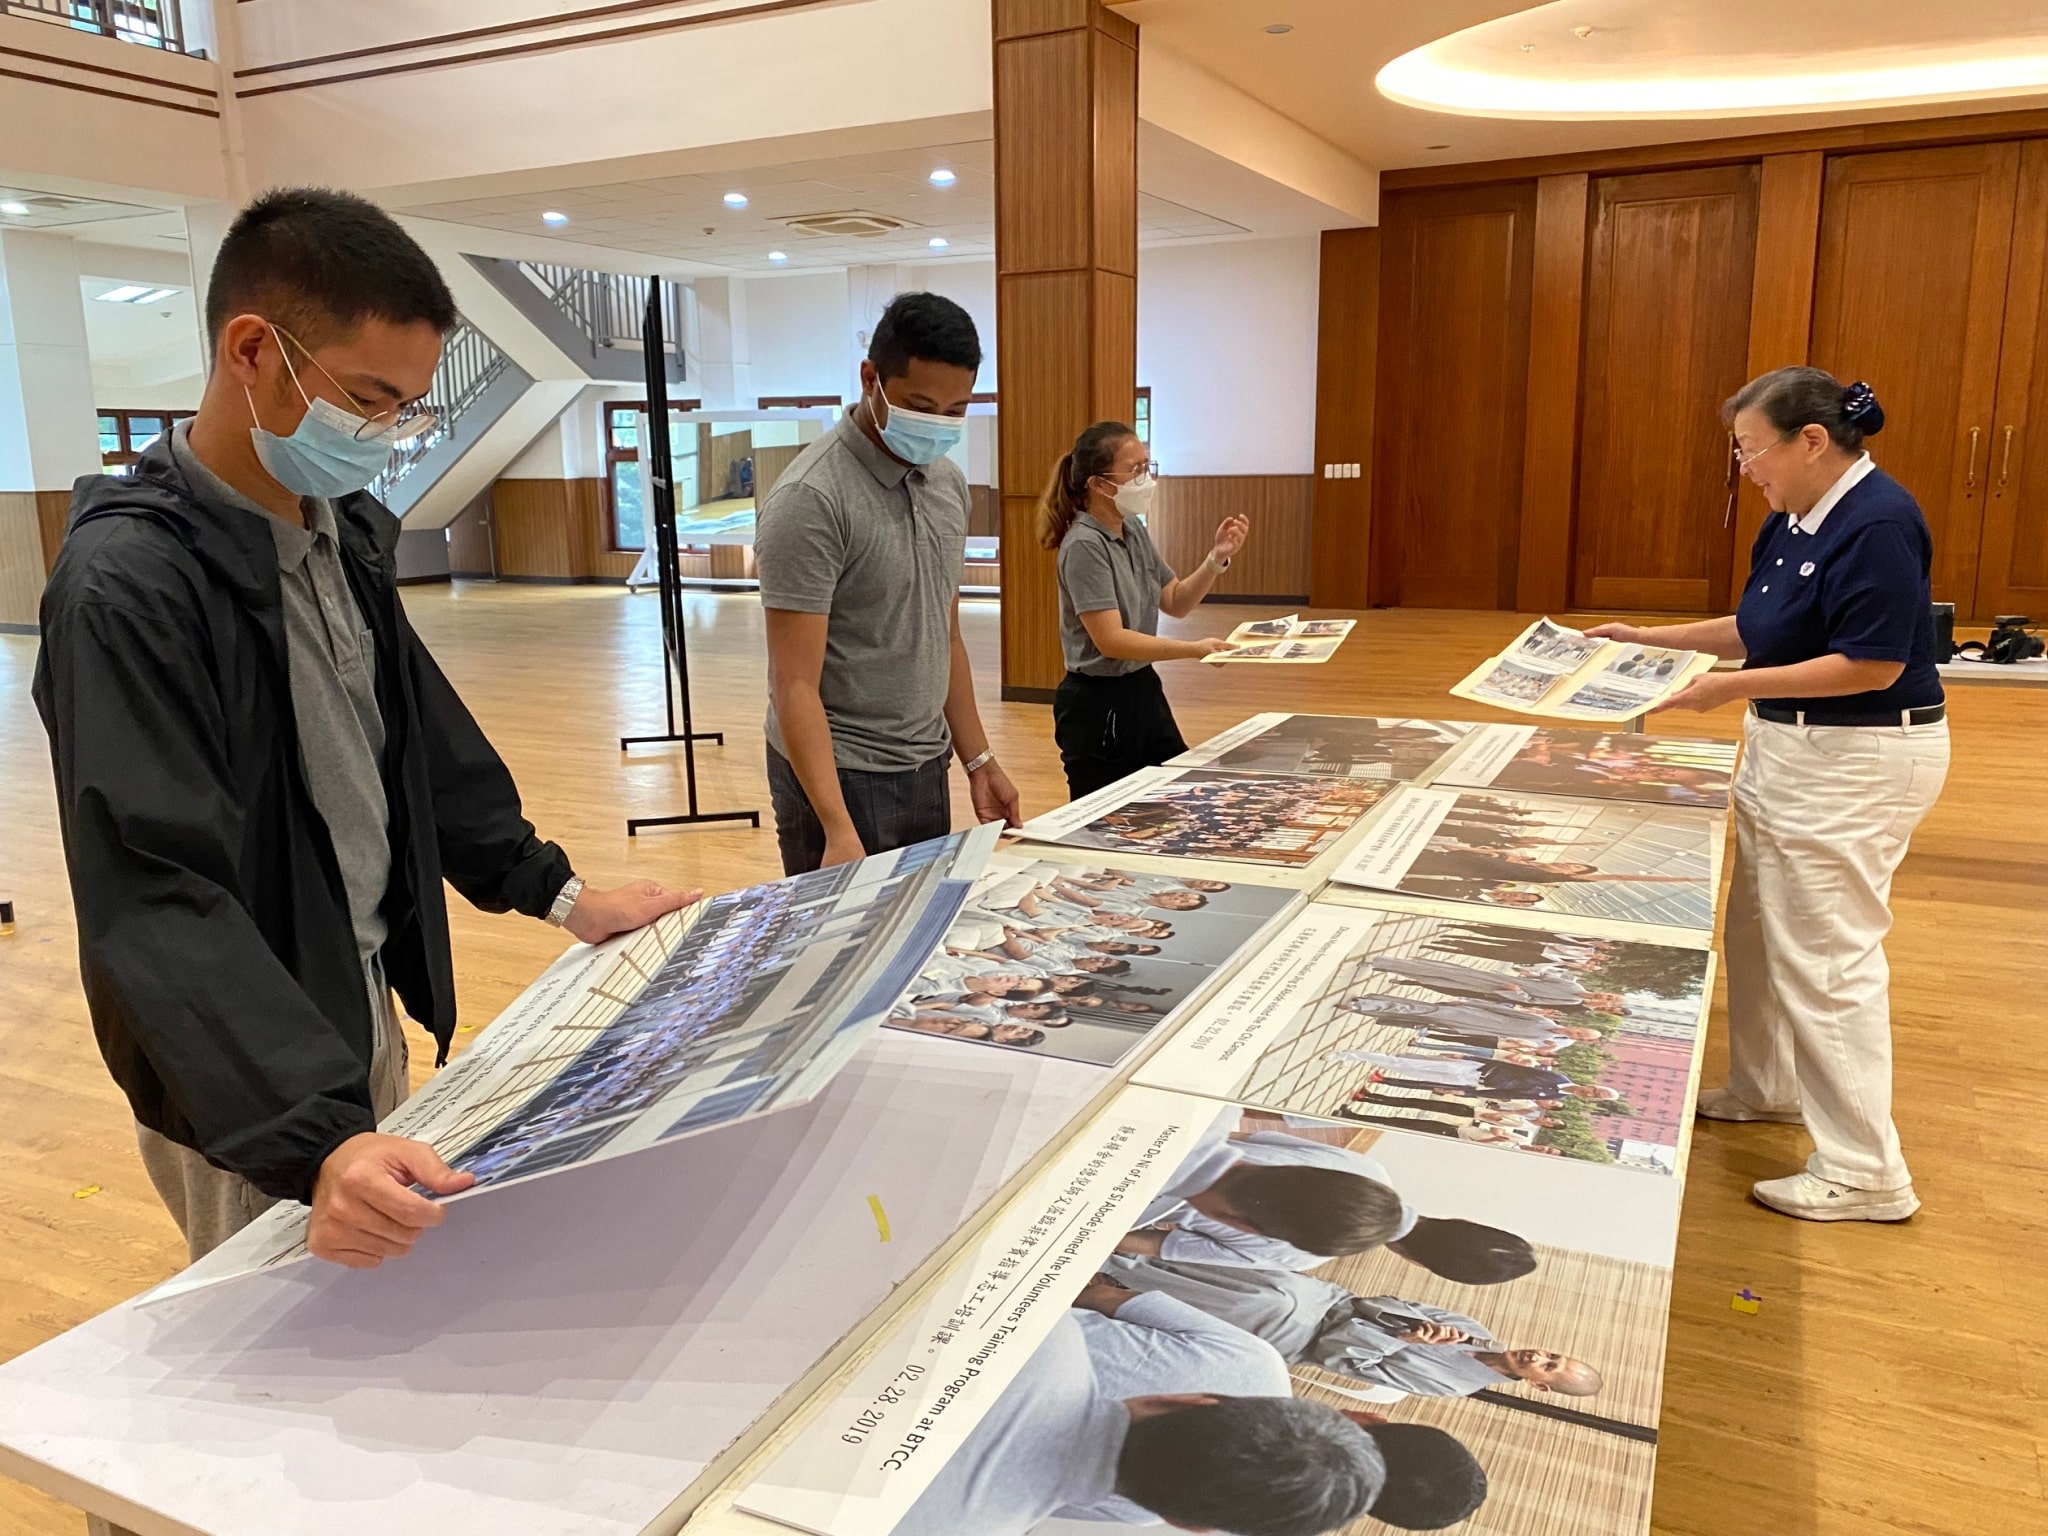 Tzu Chi’s Communications Department sort out large-format images for the Tzu Chi photo exhibit at the Jing Si Auditorium.【Photo by Harold Alzaga】